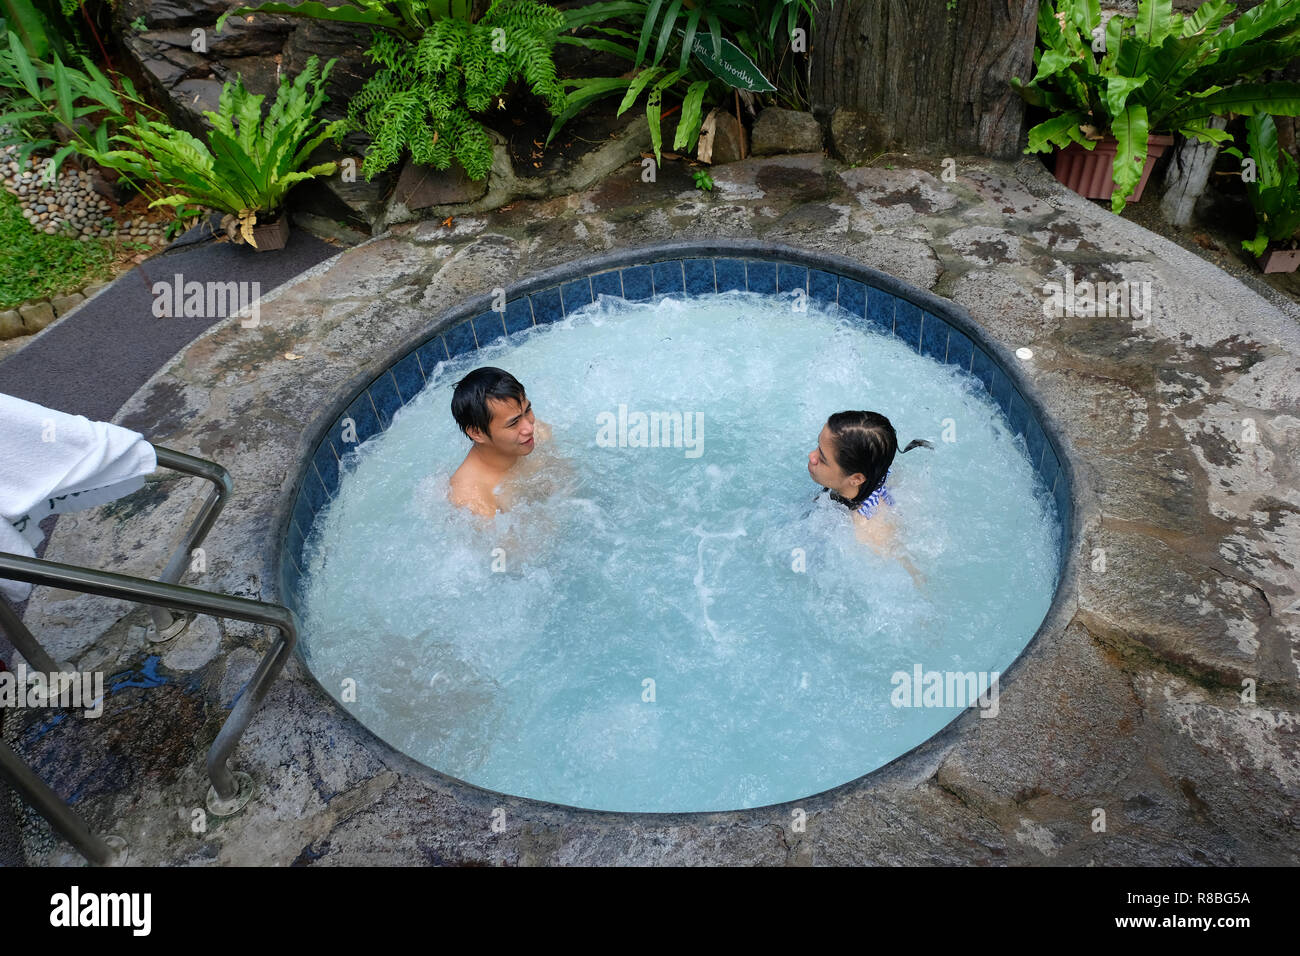 A Young Filipino Couple Bathing In A Swimming Pool In Luljetta S Place Garden Suites Specialty Hotel In Antipolo City In The Philippines Stock Photo Alamy